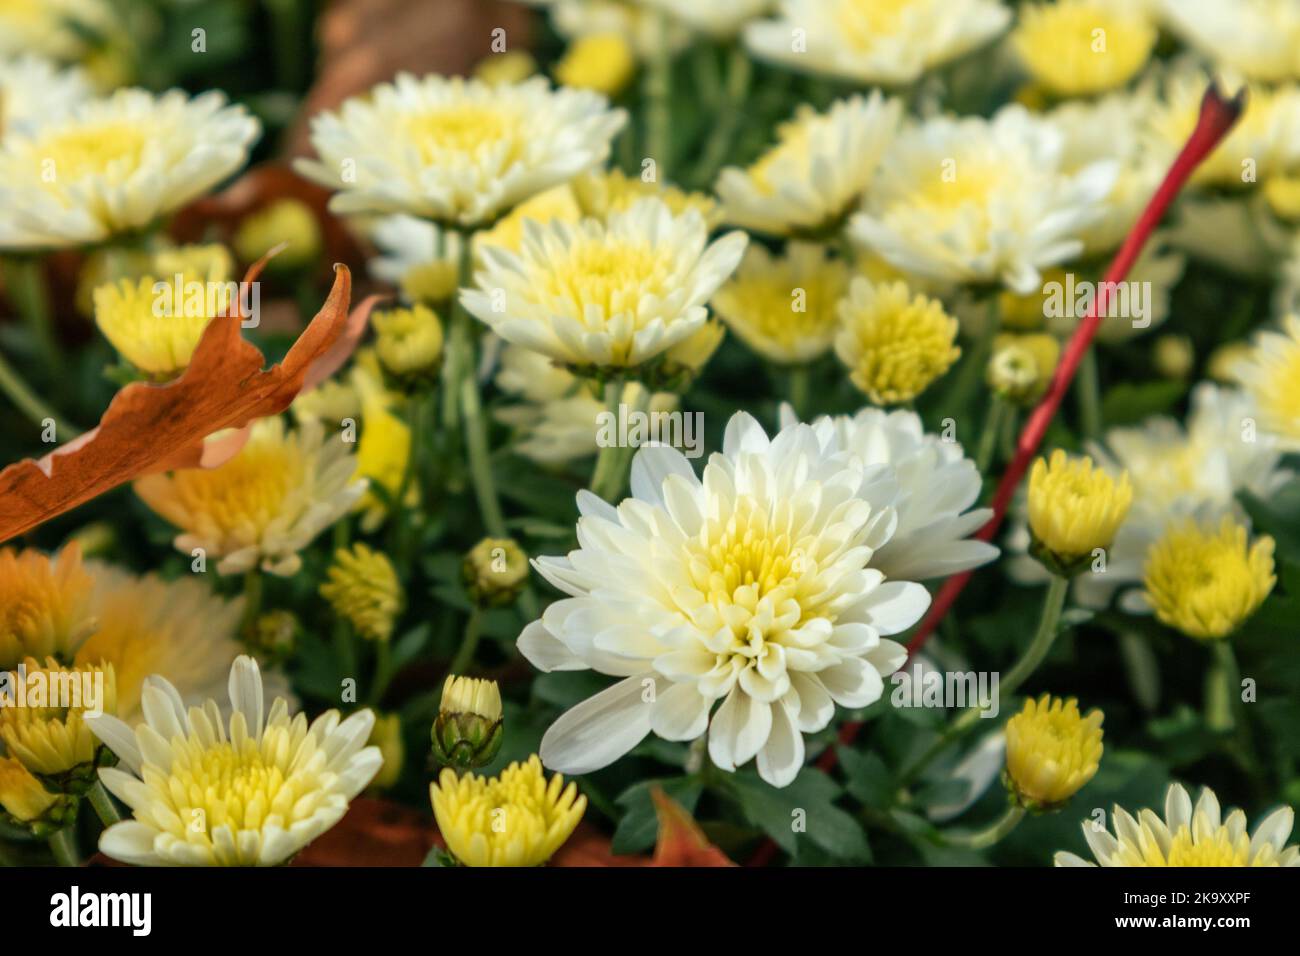 Chrysanthemums, chrysanths sunny flowerbed with fallen leaves. Small autumn white-yellow flowers bloom close-up Stock Photo